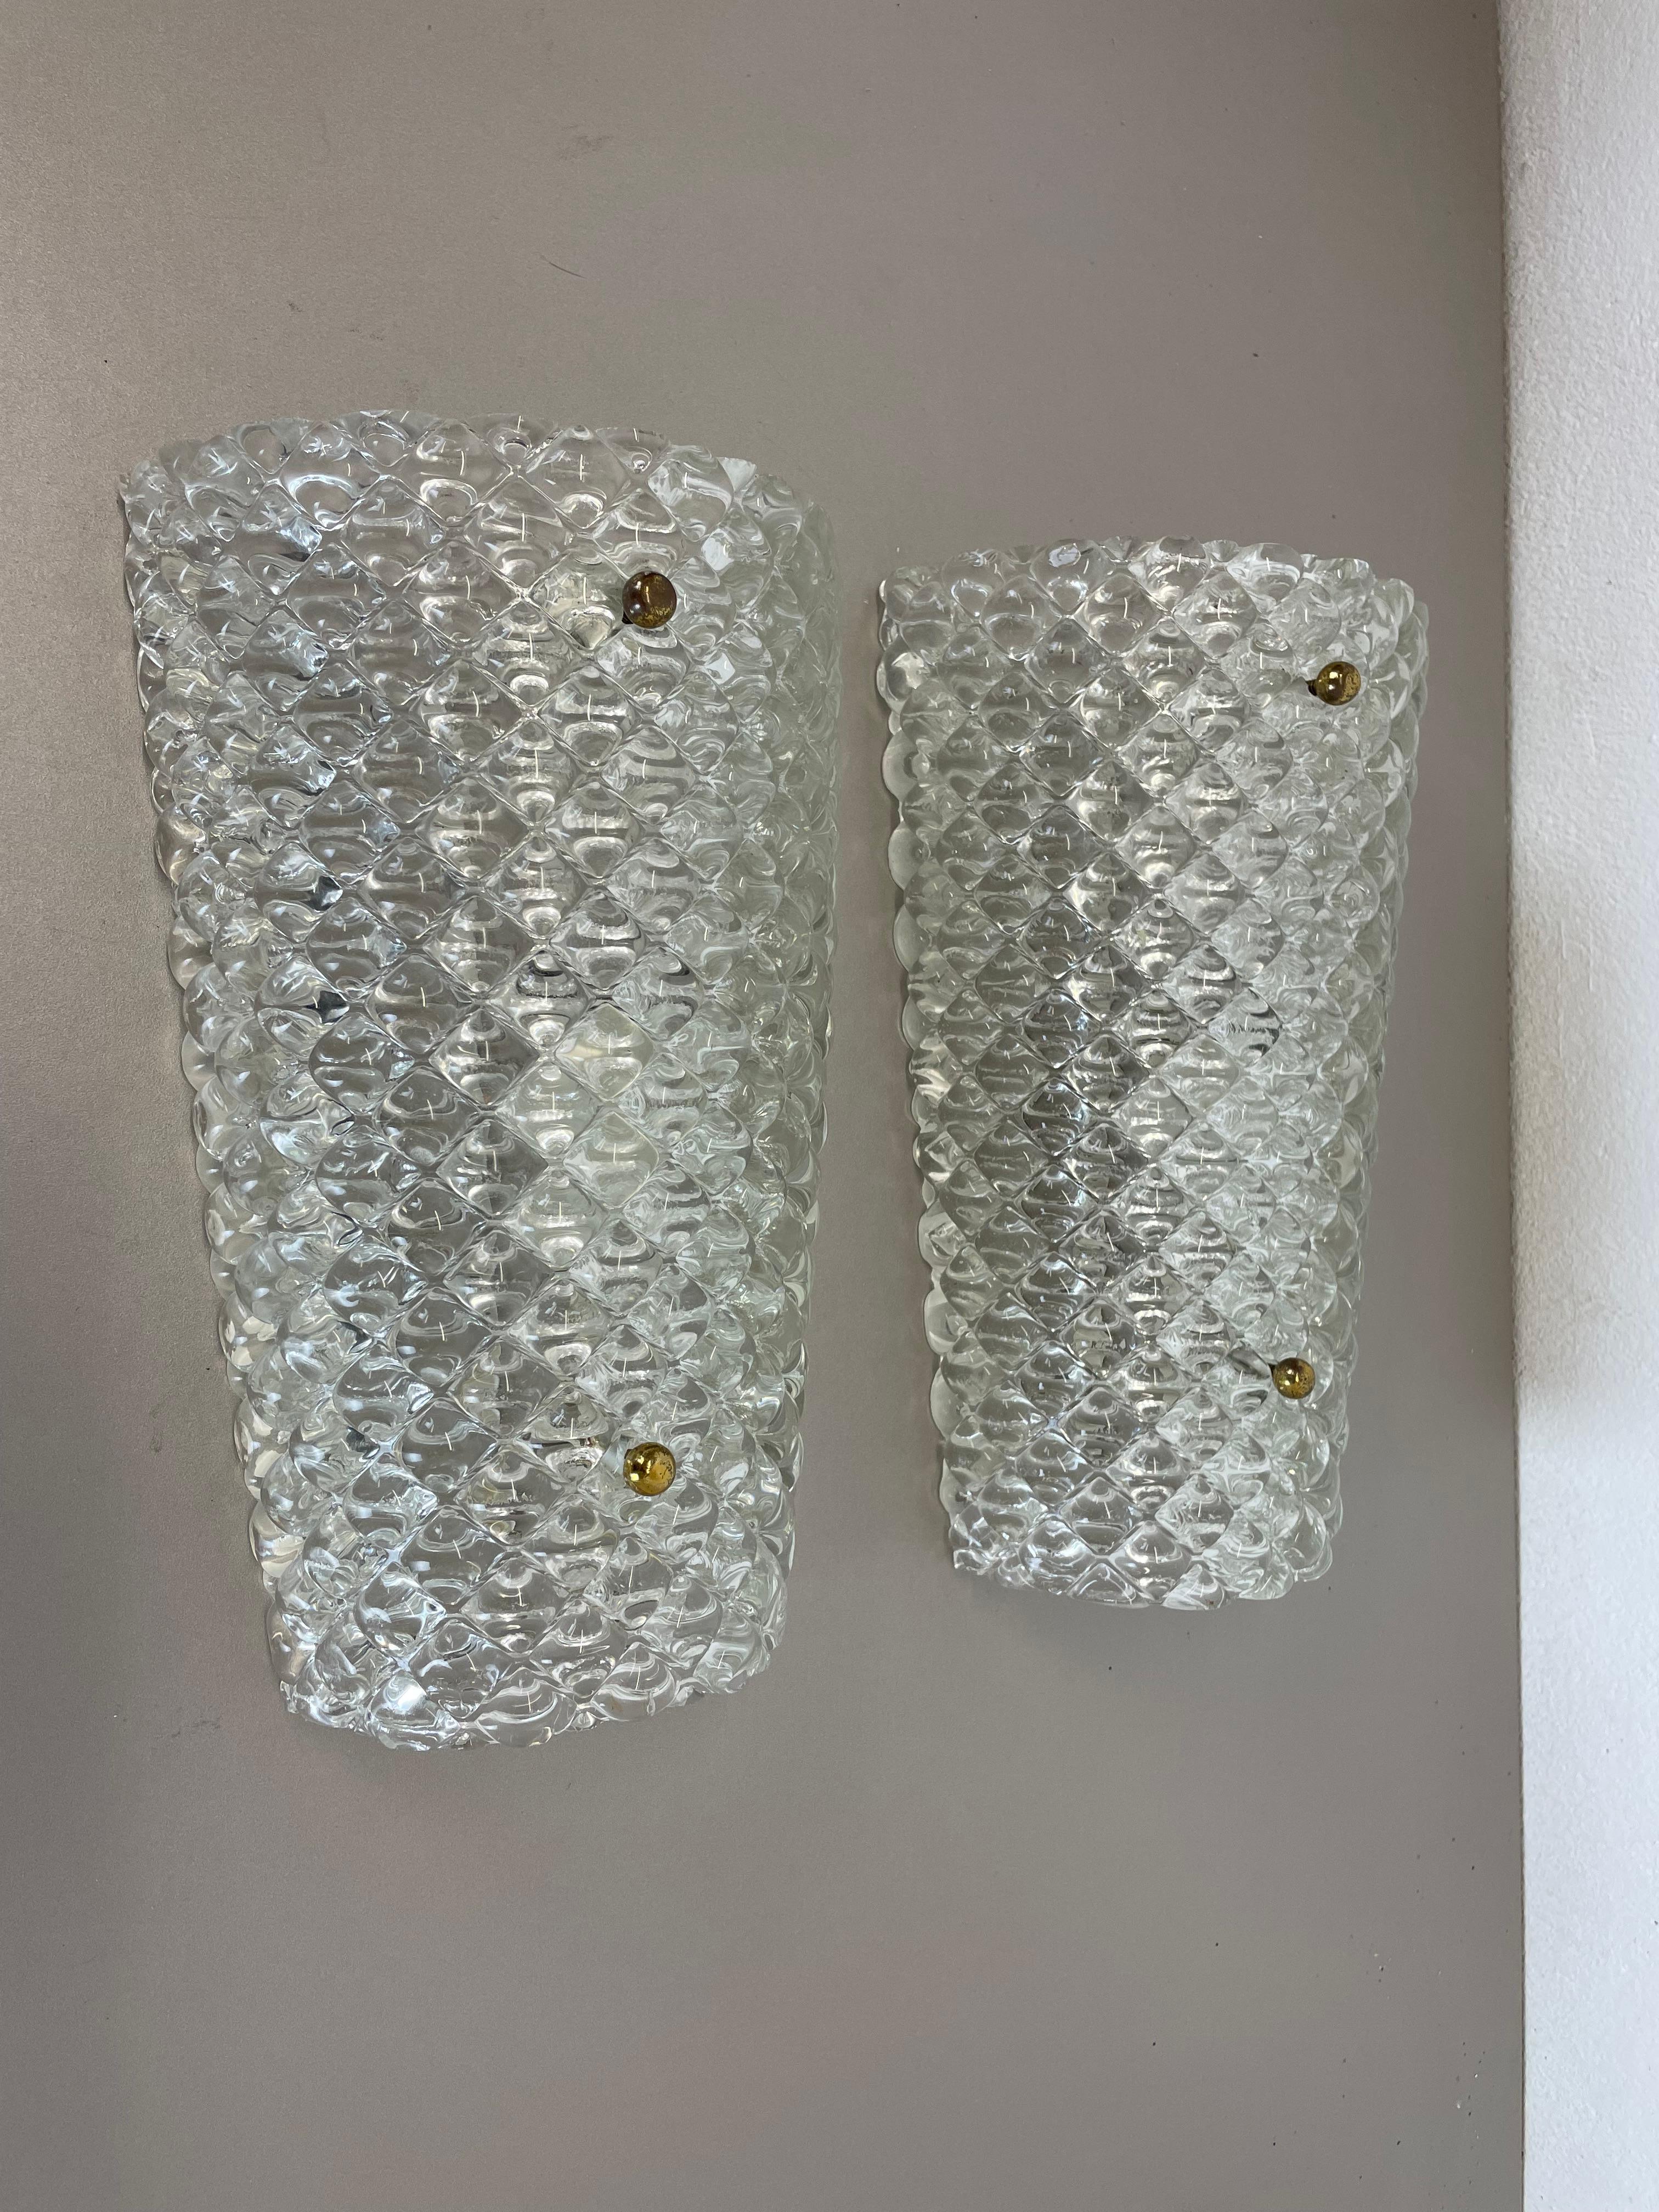 Article:

Set of two

Wall light sconces


Origin:

Austria



Age:

1950s



This set of two modernist lights was produced in Austria in the 1950s. It is made from heavy crystal glass with a abstract patterned structured surface and a metal wall